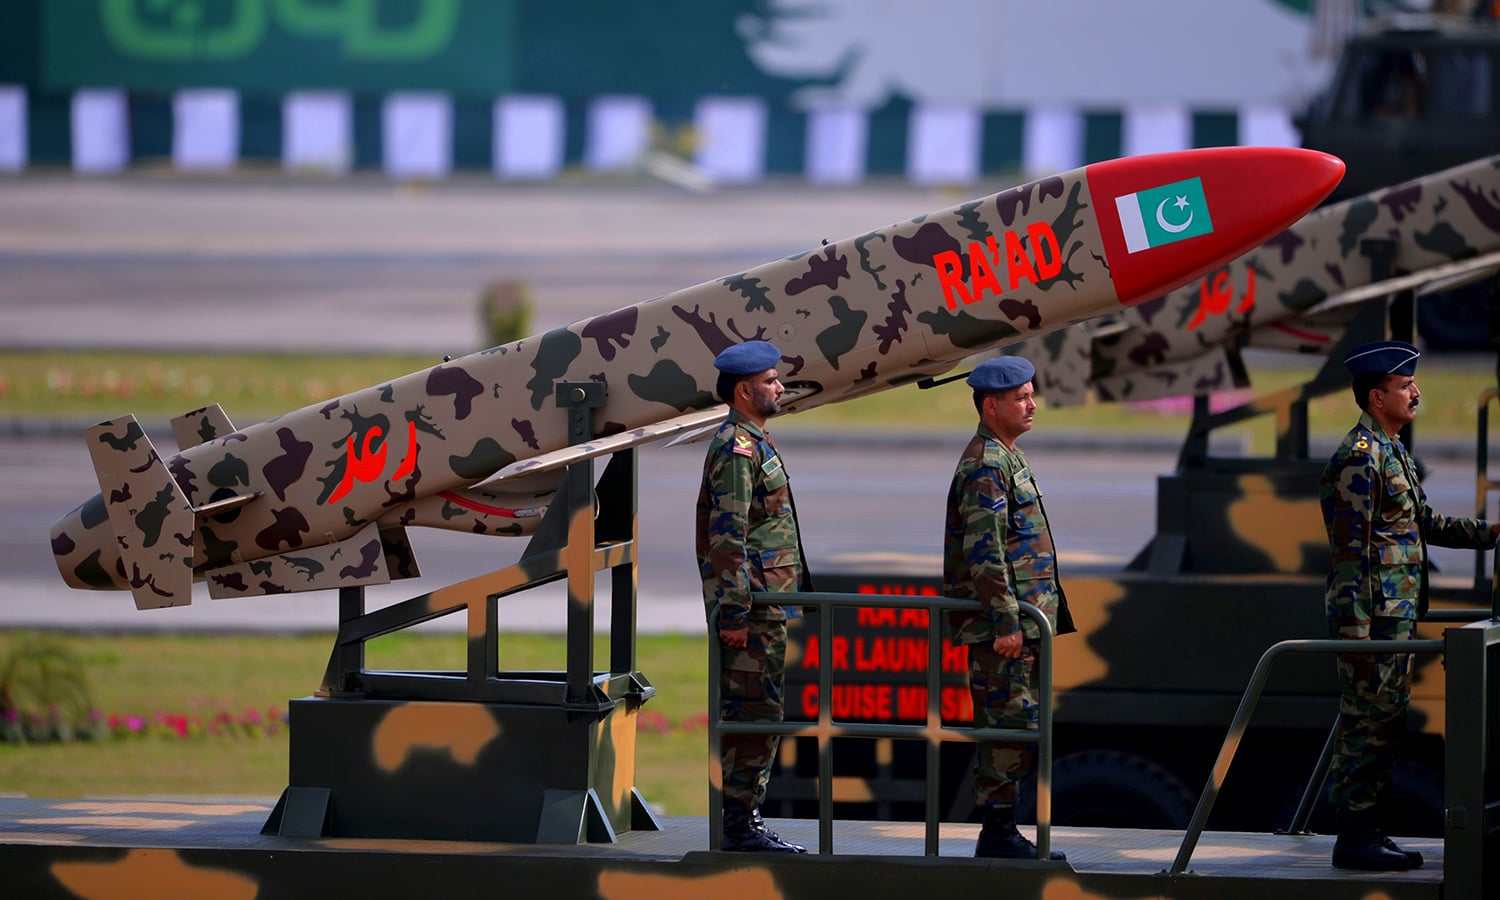 pakistani army soldiers travel on a vehicle carrying cruise missile ra 039 ad during the pakistan day military parade in islamabad on march 23 2016 pakistan national day commemorates the passing of the lahore resolution when a separate nation for the muslims of the british indian empire was demanded on march 23 1940 afp photo aamir qureshi